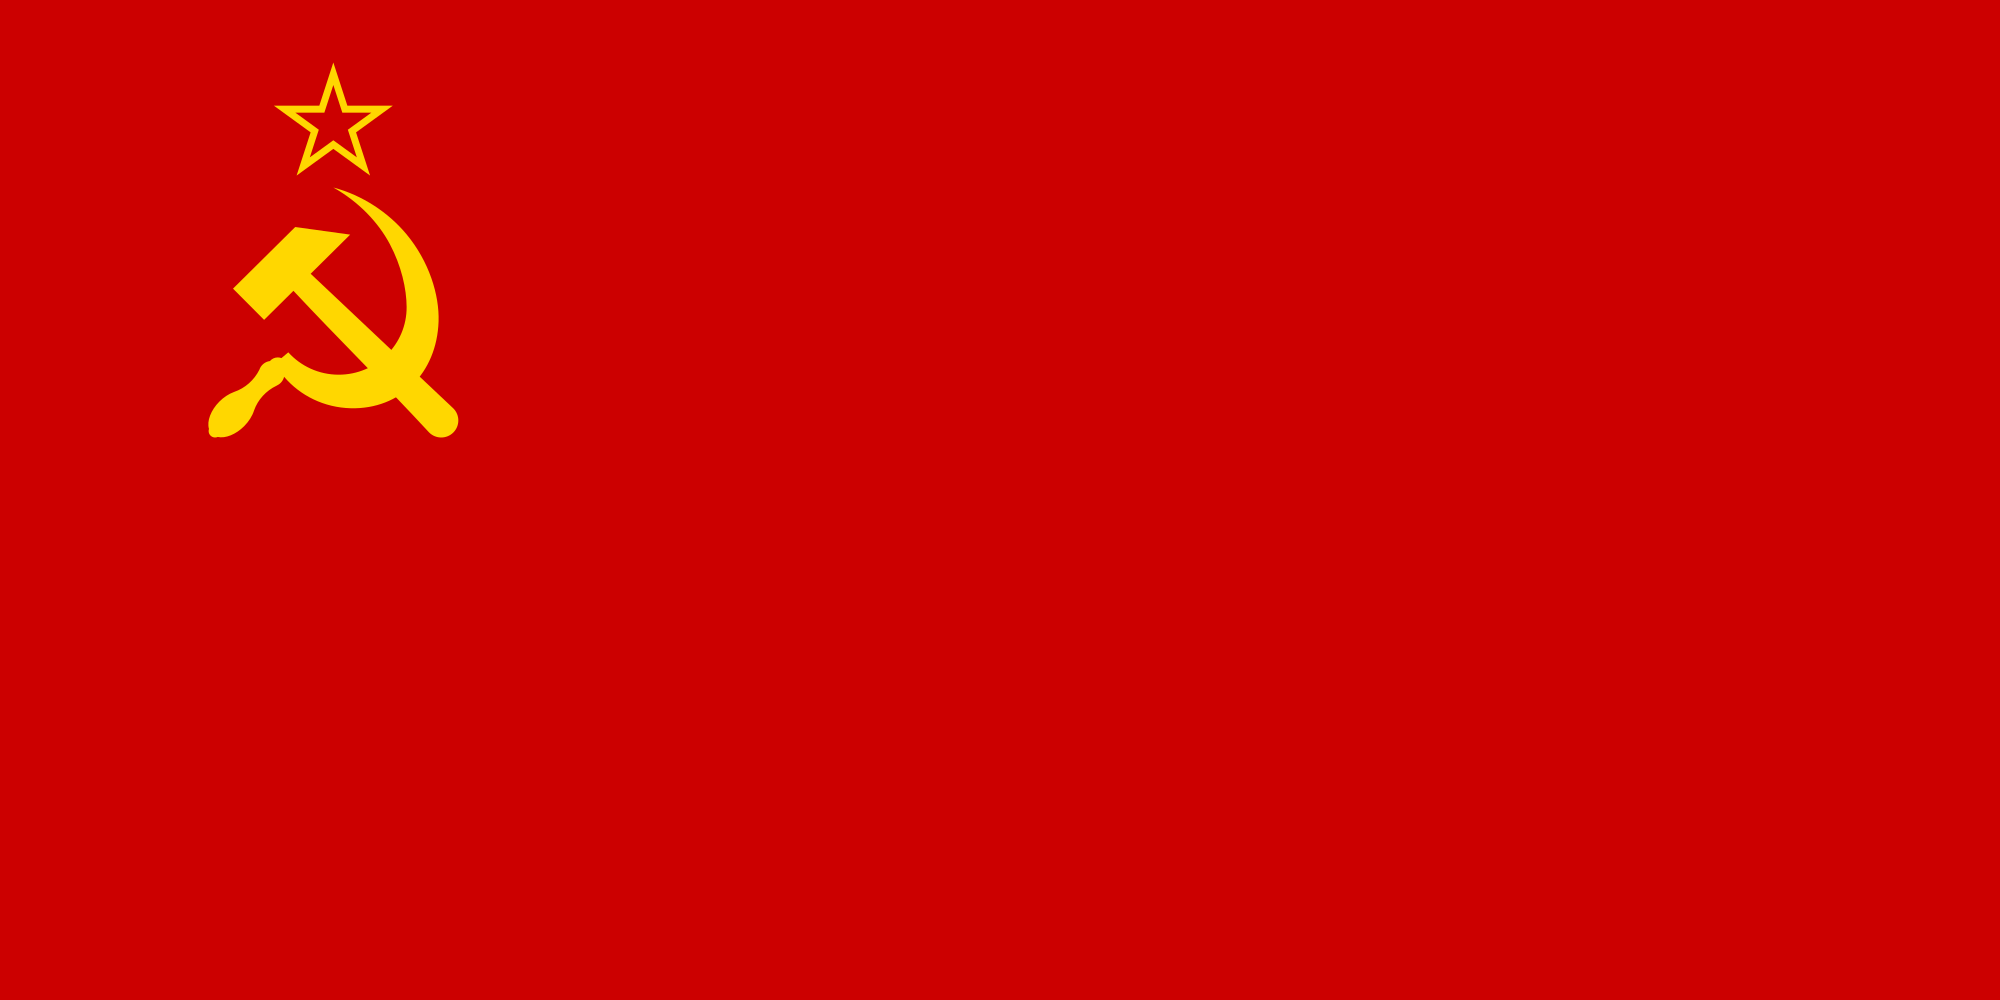 2000px-Flag_of_the_Soviet_Union.svg.png